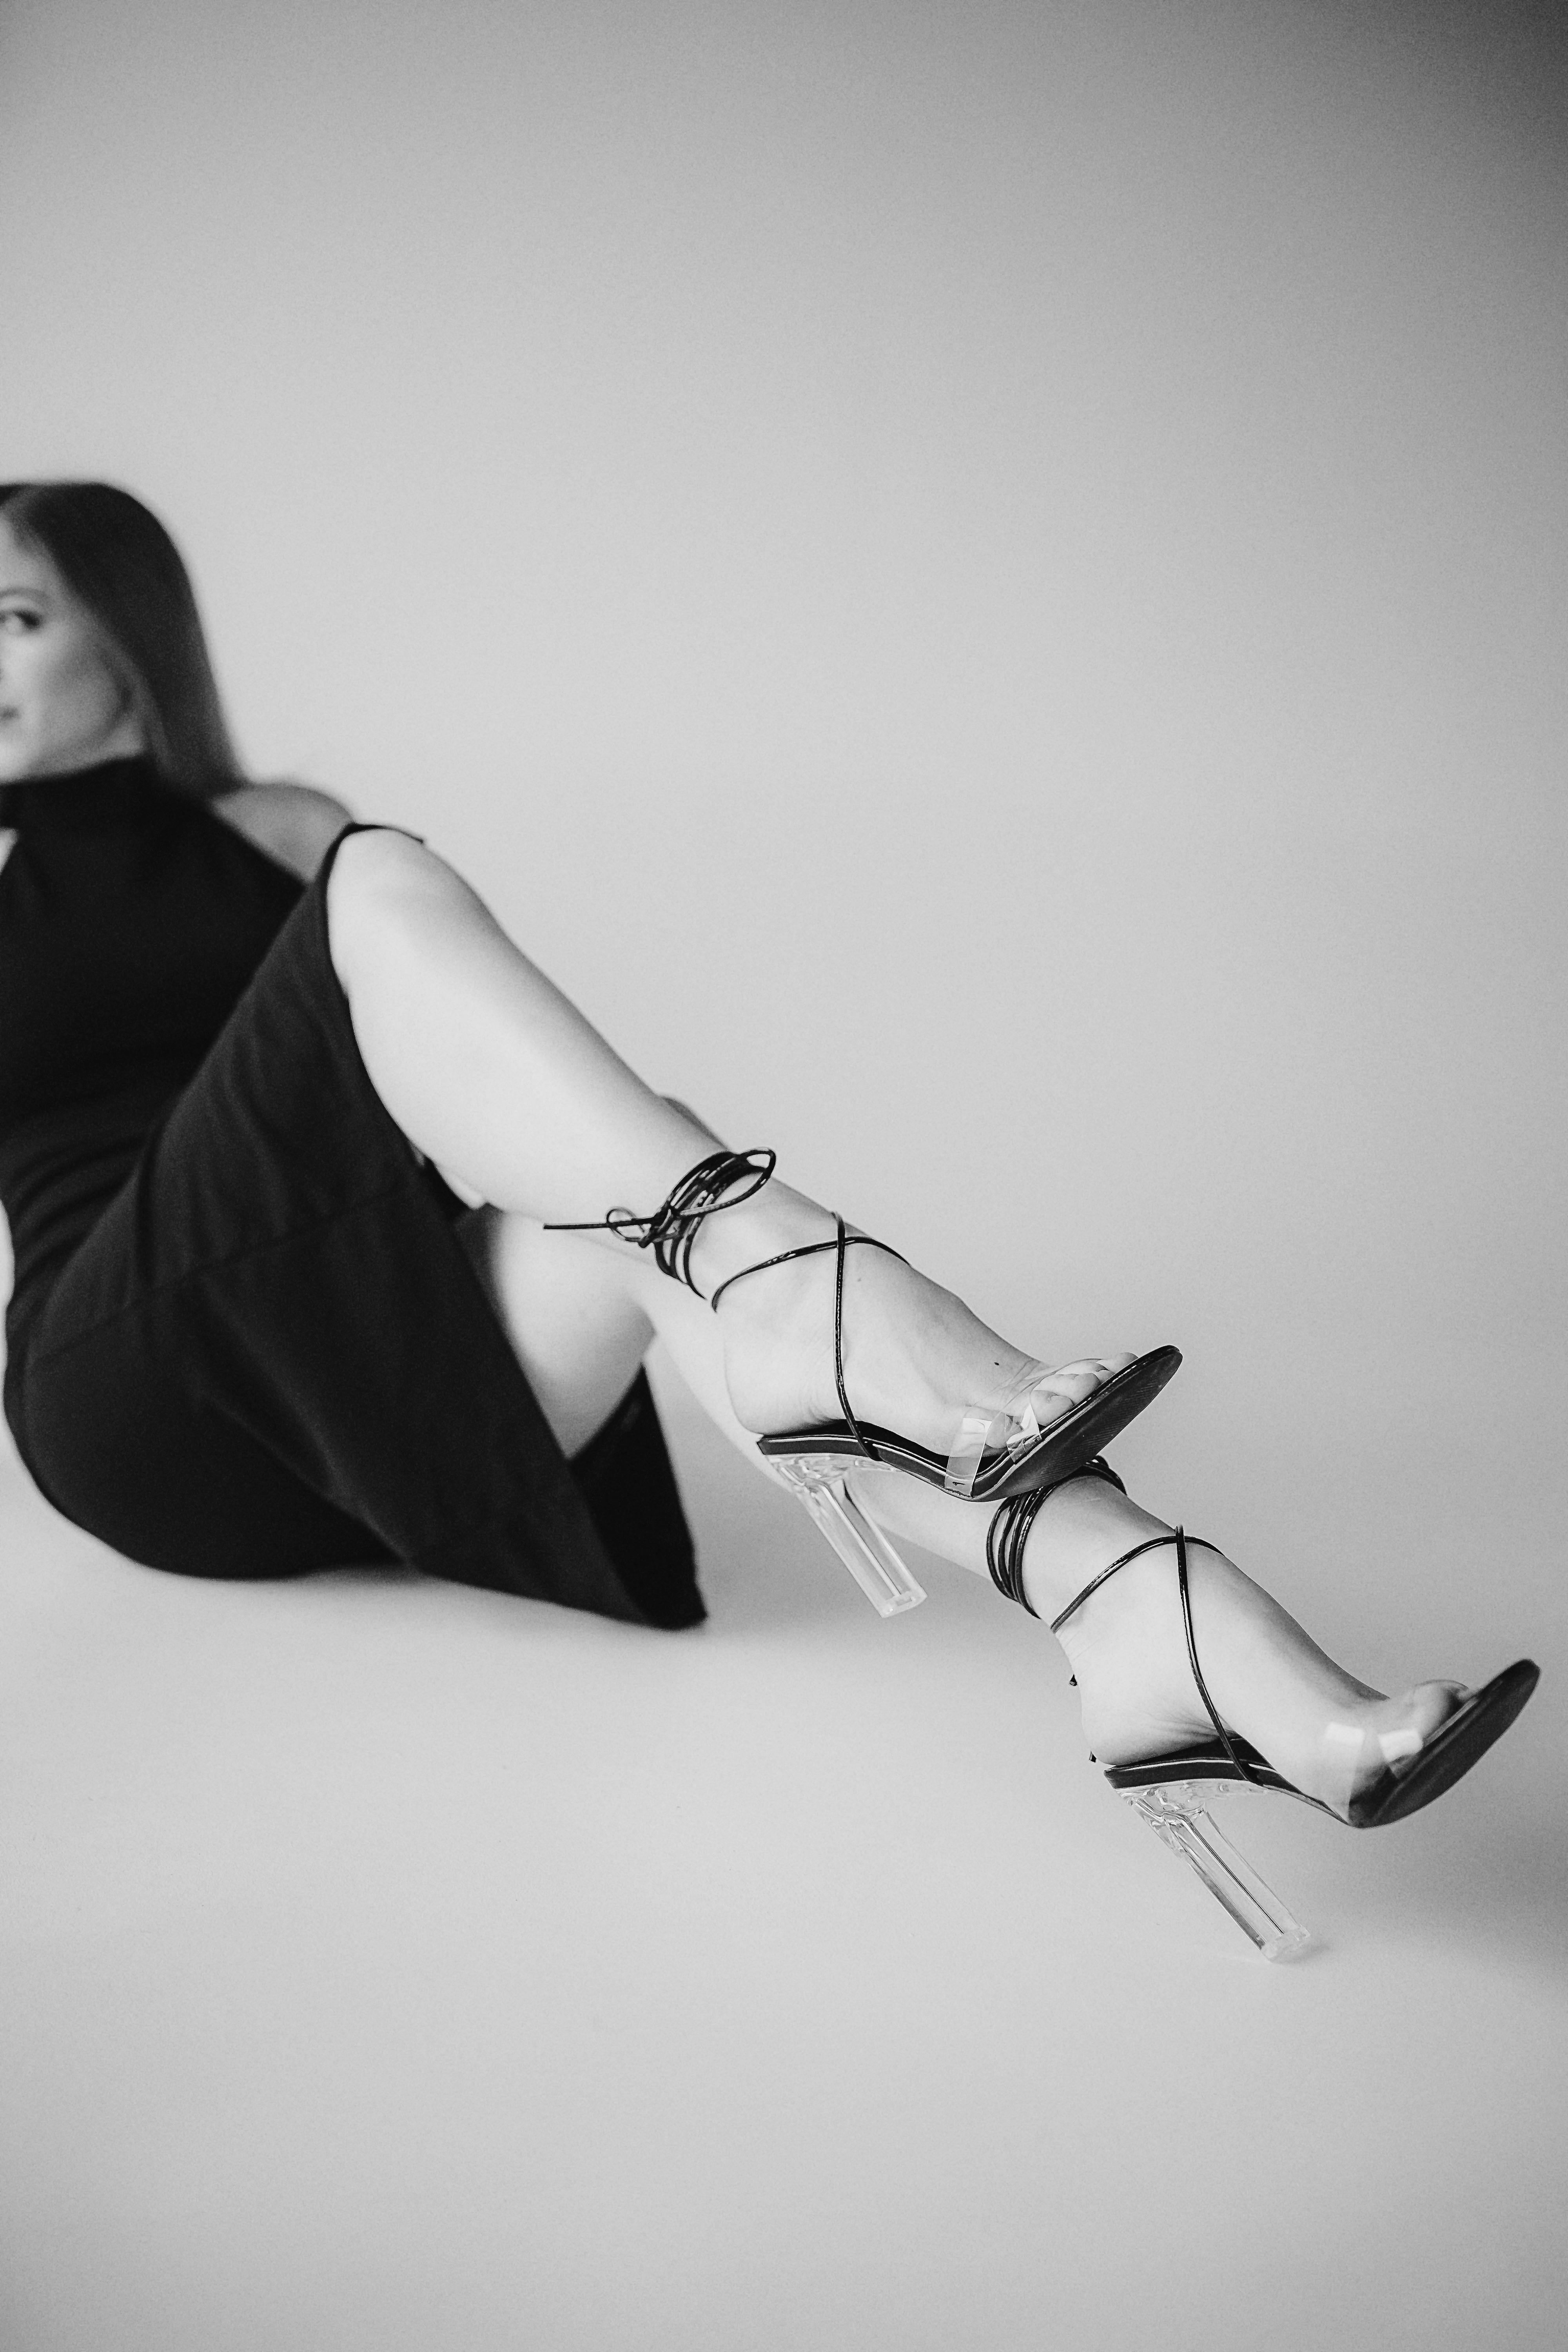 Woman in High Heels Laying on Ground · Free Stock Photo